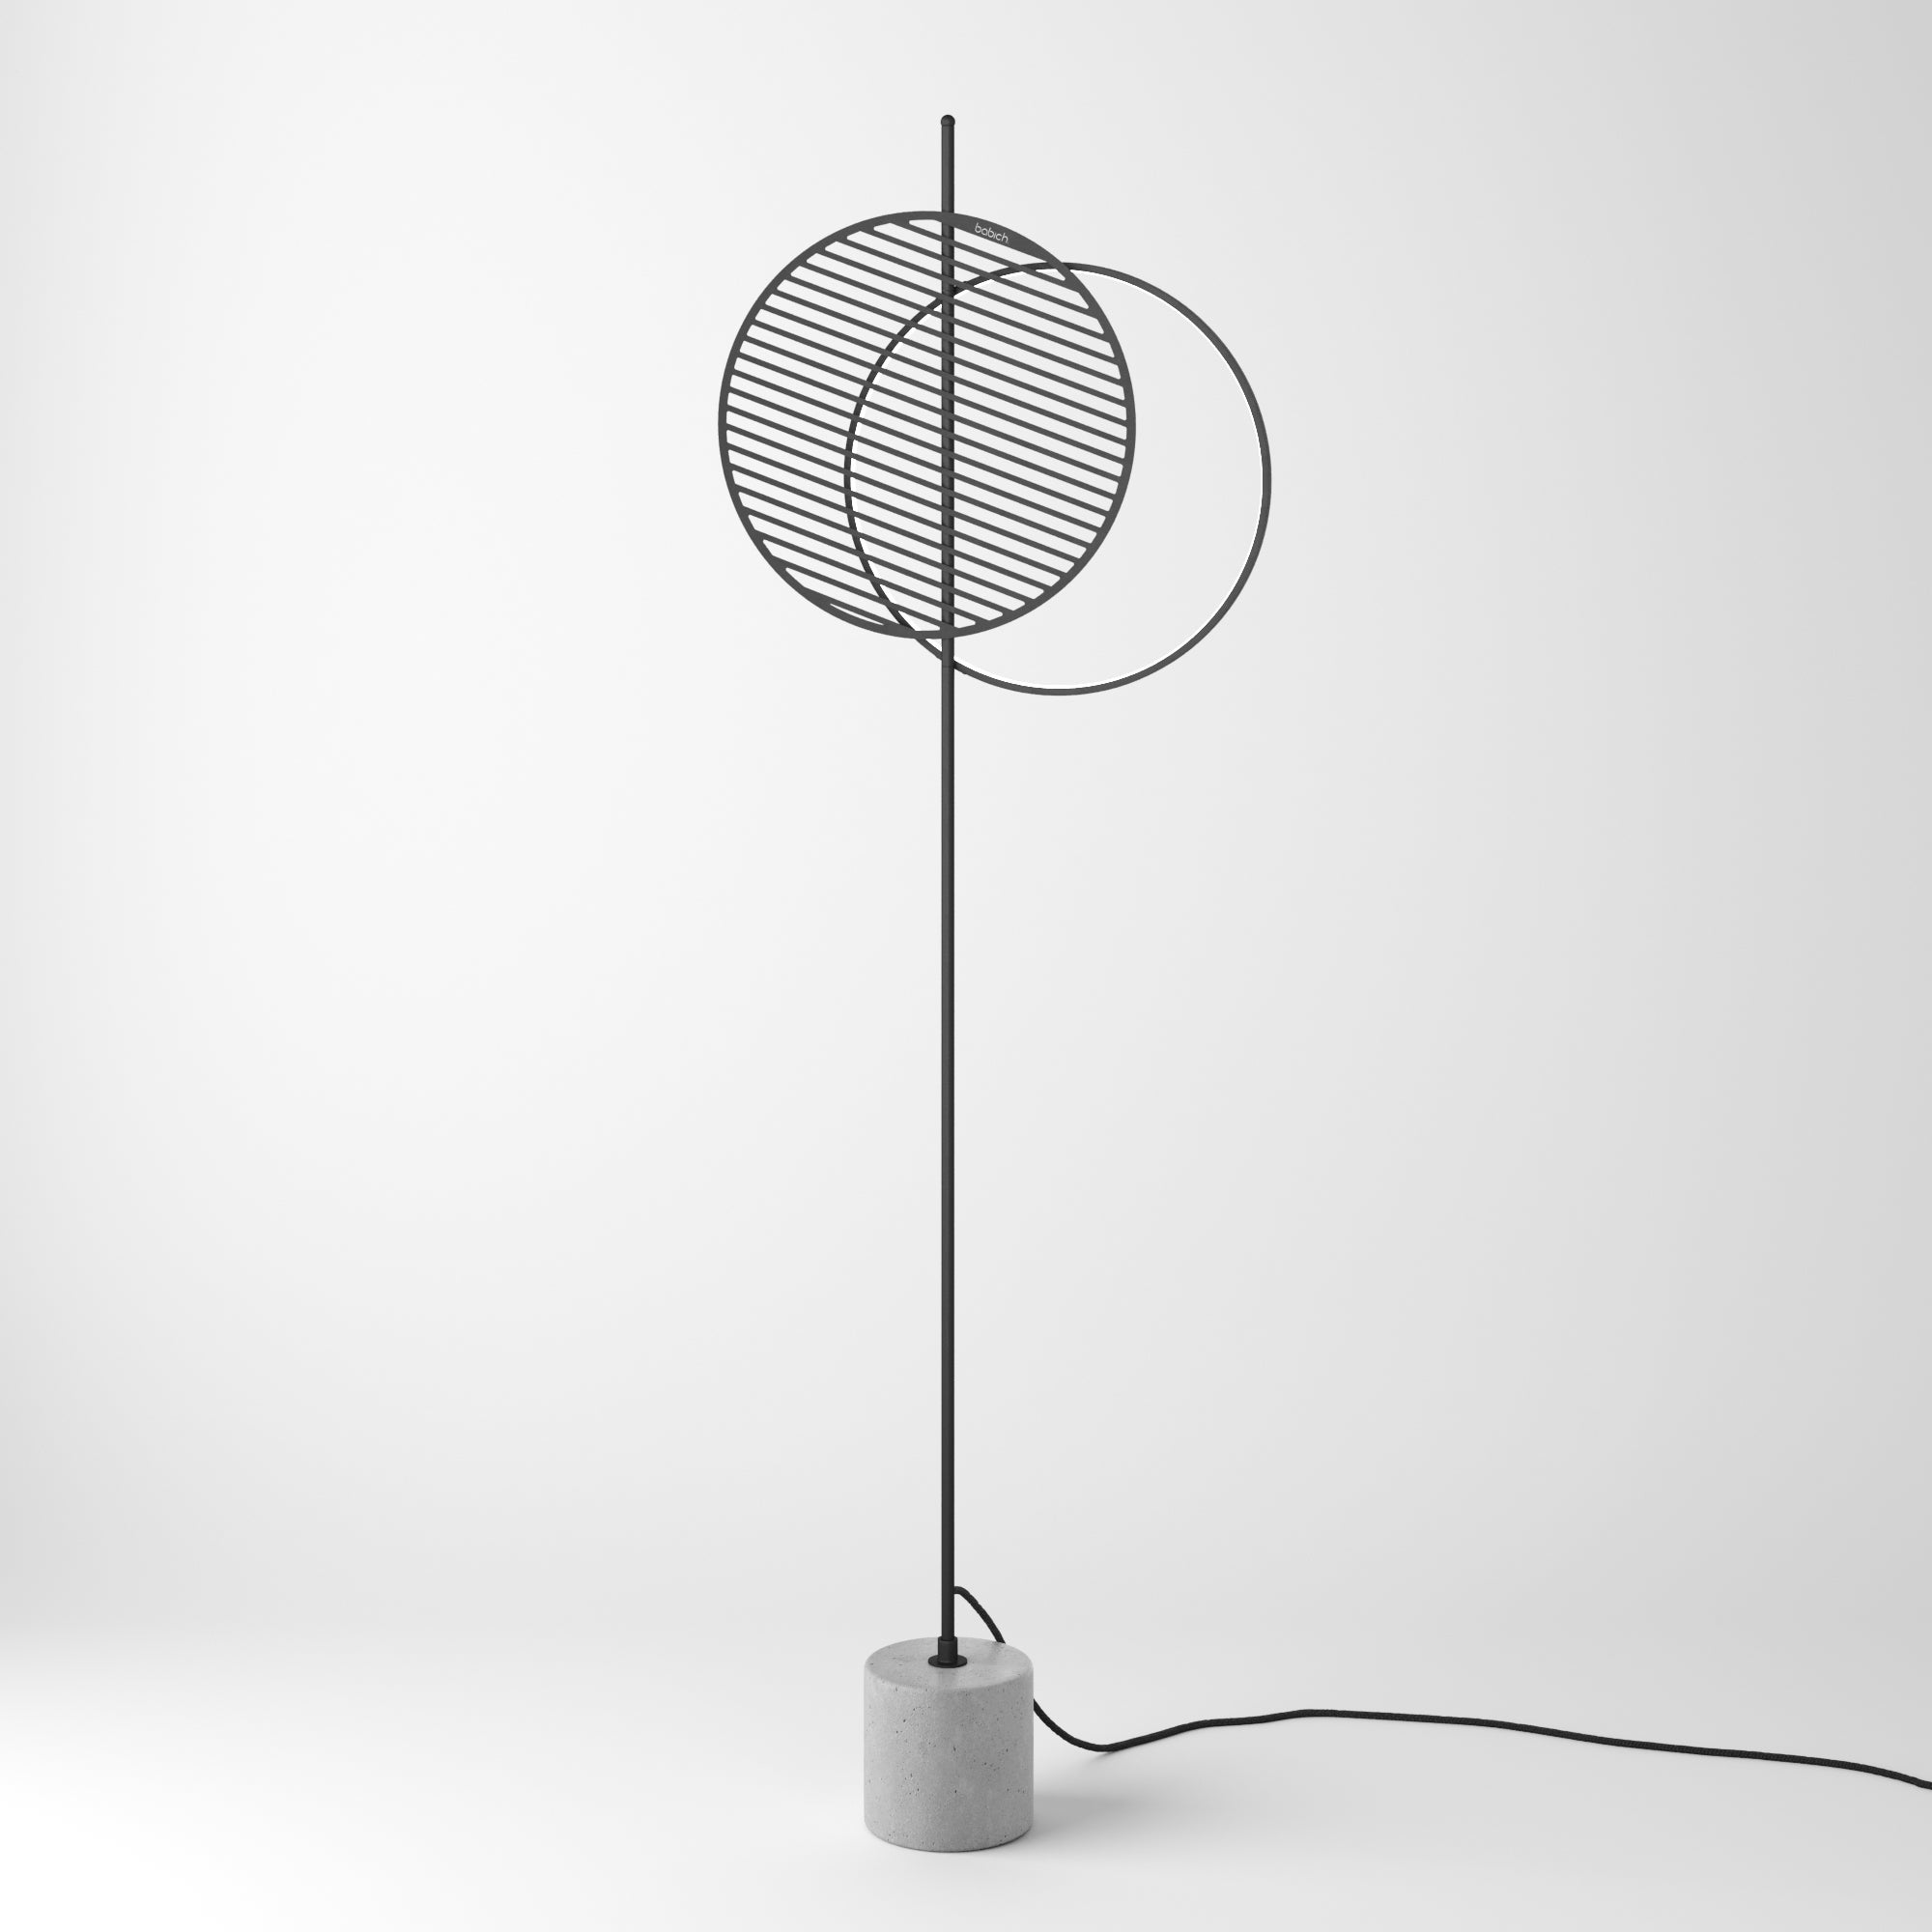 Mid floor lighting

Product name: Mid F
Category: Lighting
Type: Floor lamp
Material: Steel rods, steel, aluminium, concrete, textile cable
Overall dimensions: H: 1500 mm / W: 500 mm
Light source: LED stripe, 2340 Lum, driver included,